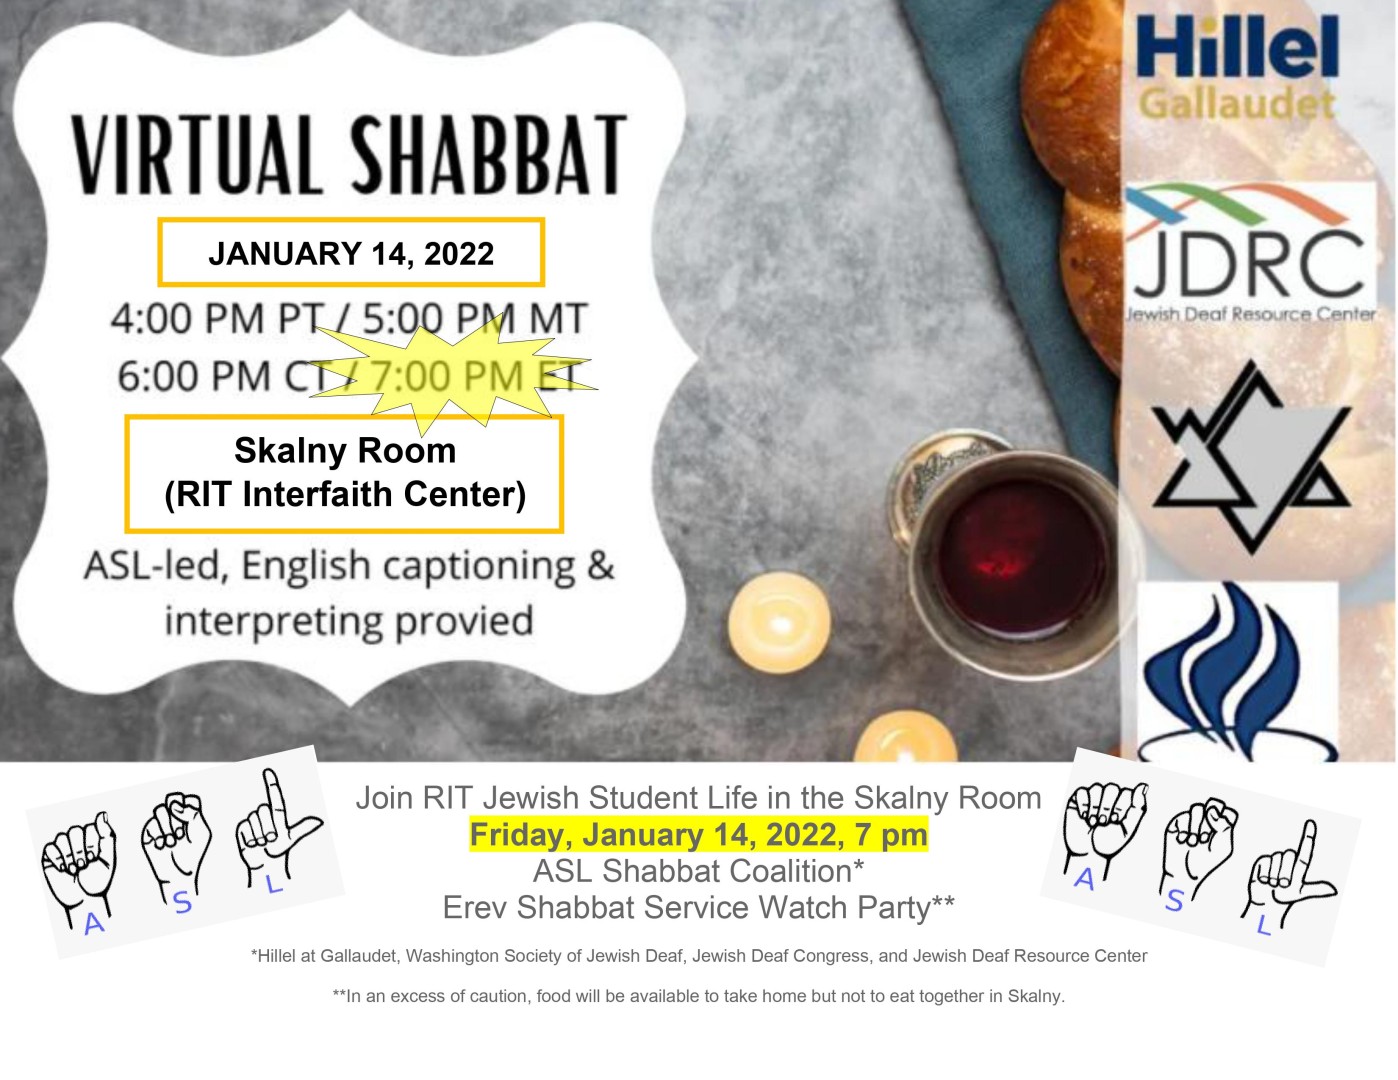 Shabbat ritual items, logos of 4 coalition partners, details of watch party event